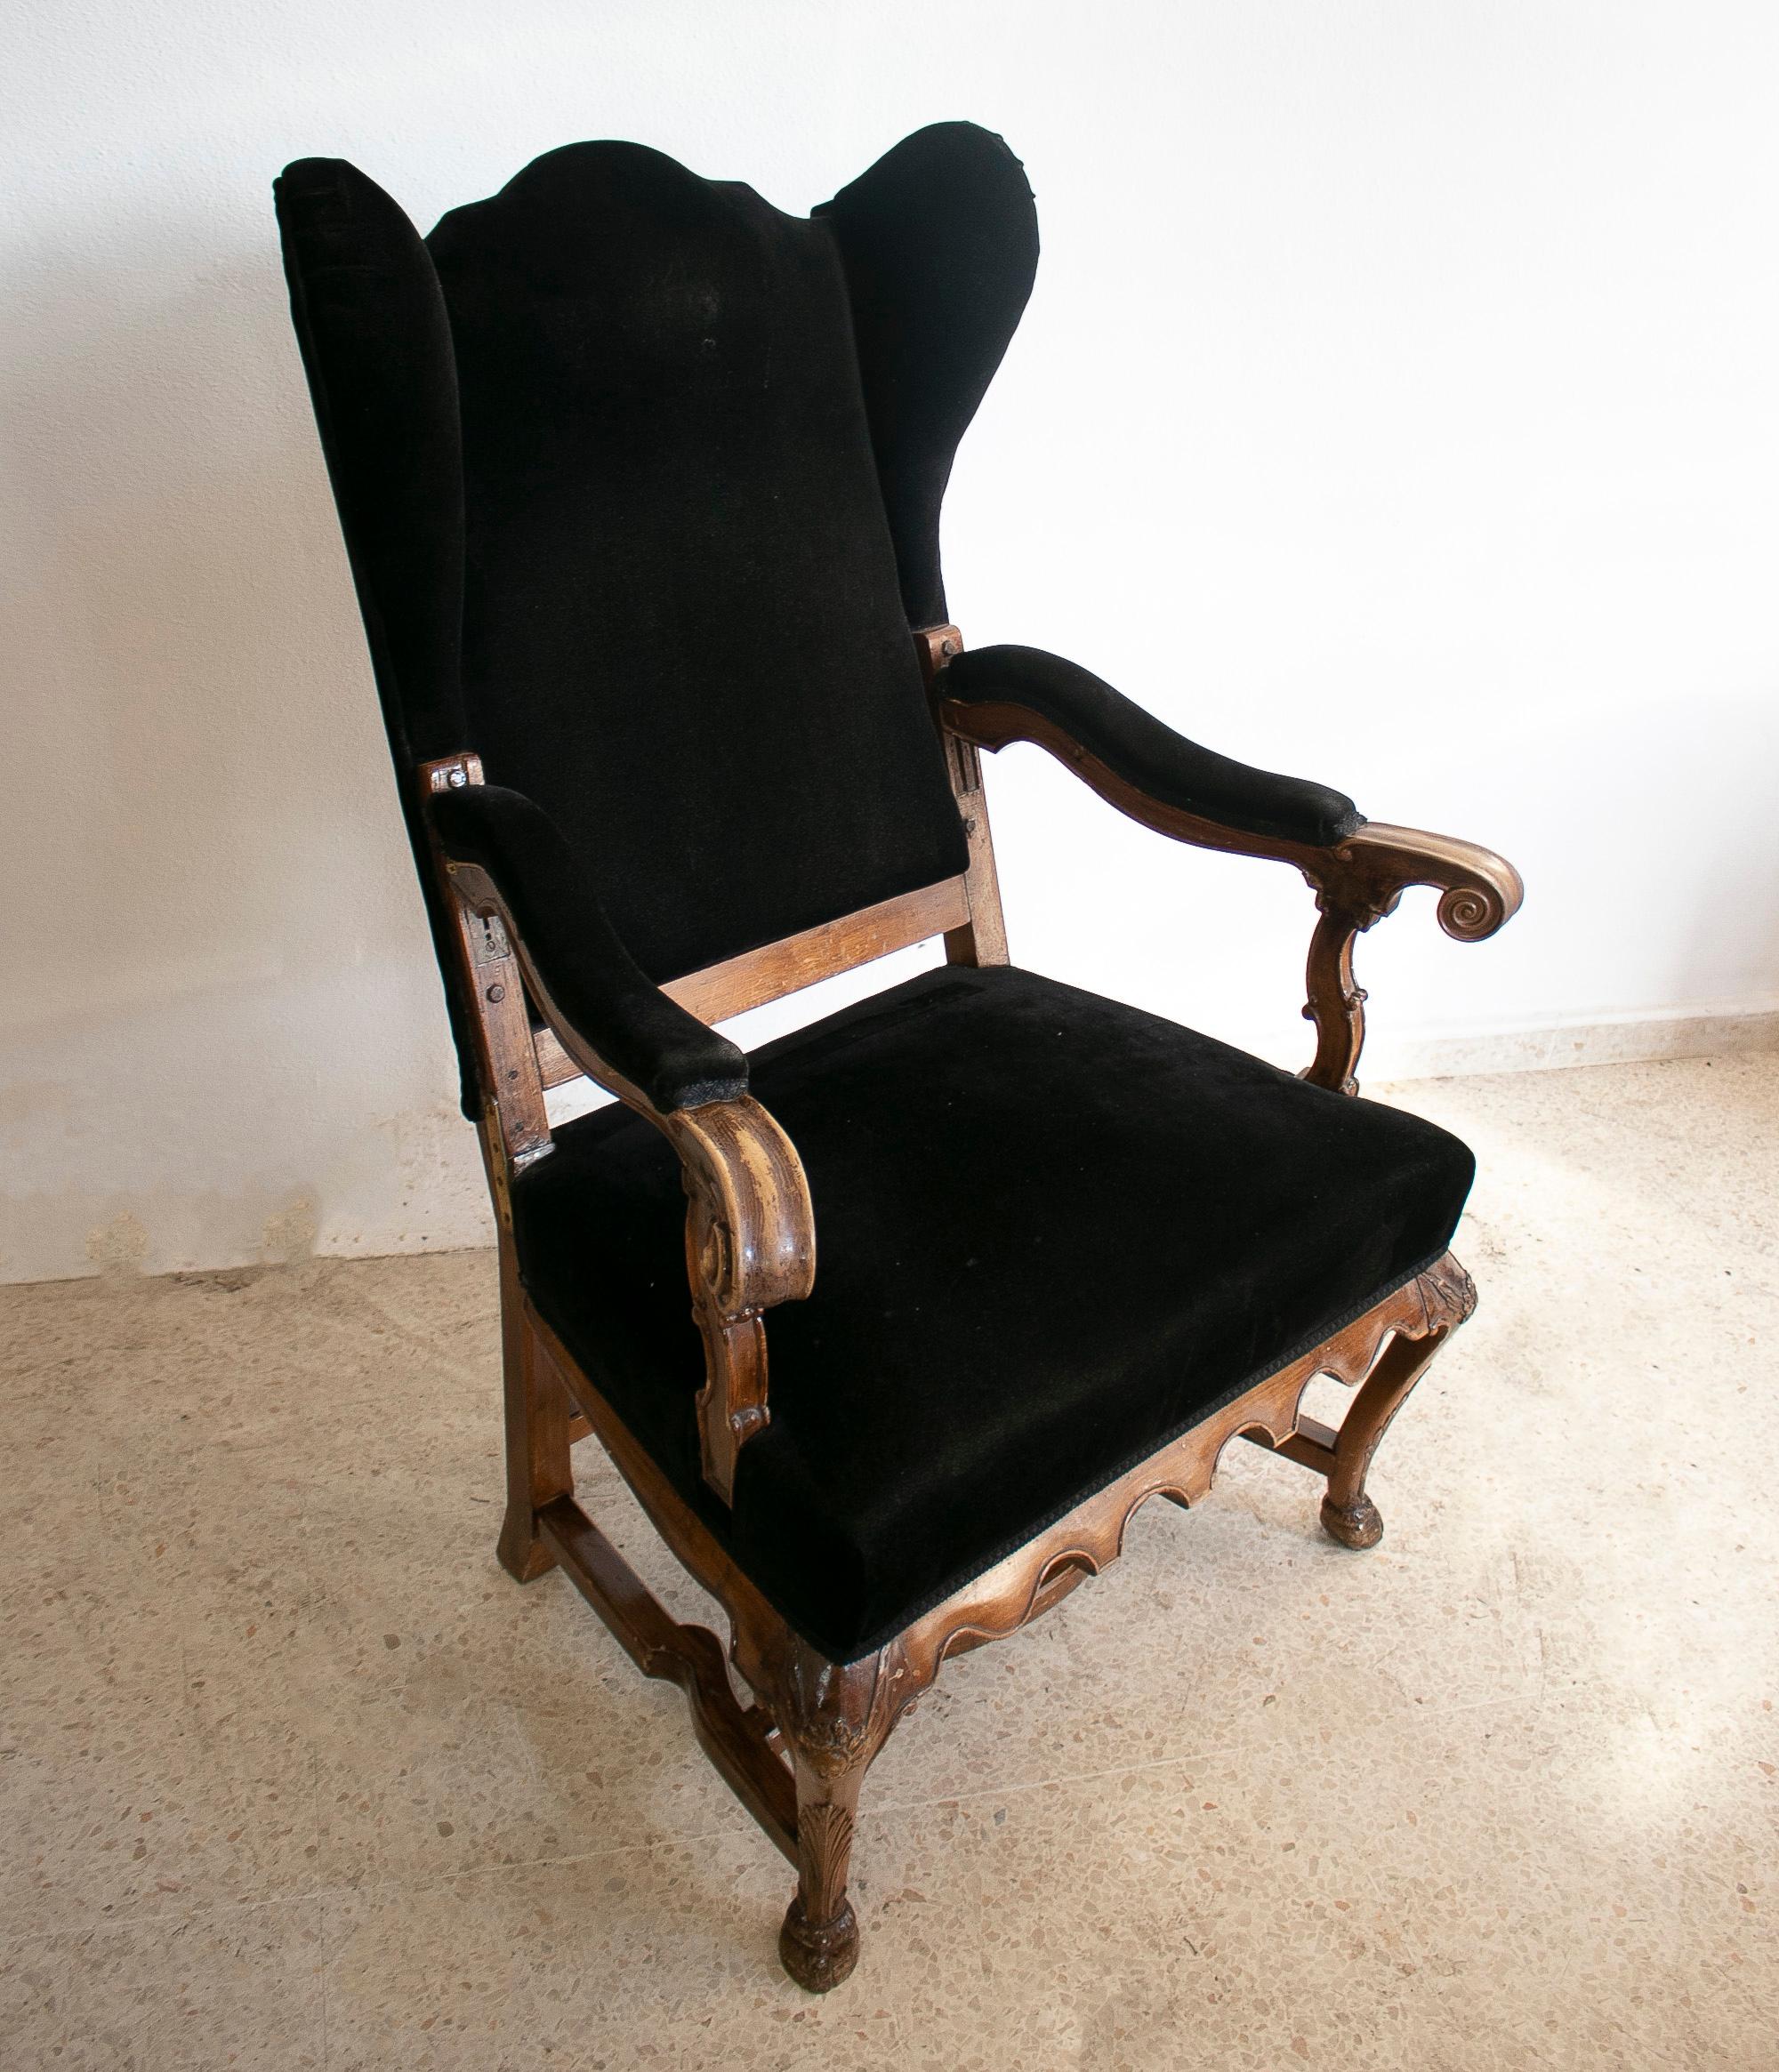 Antique 19th century English wooden winged armchair upholstered with velvet.
  